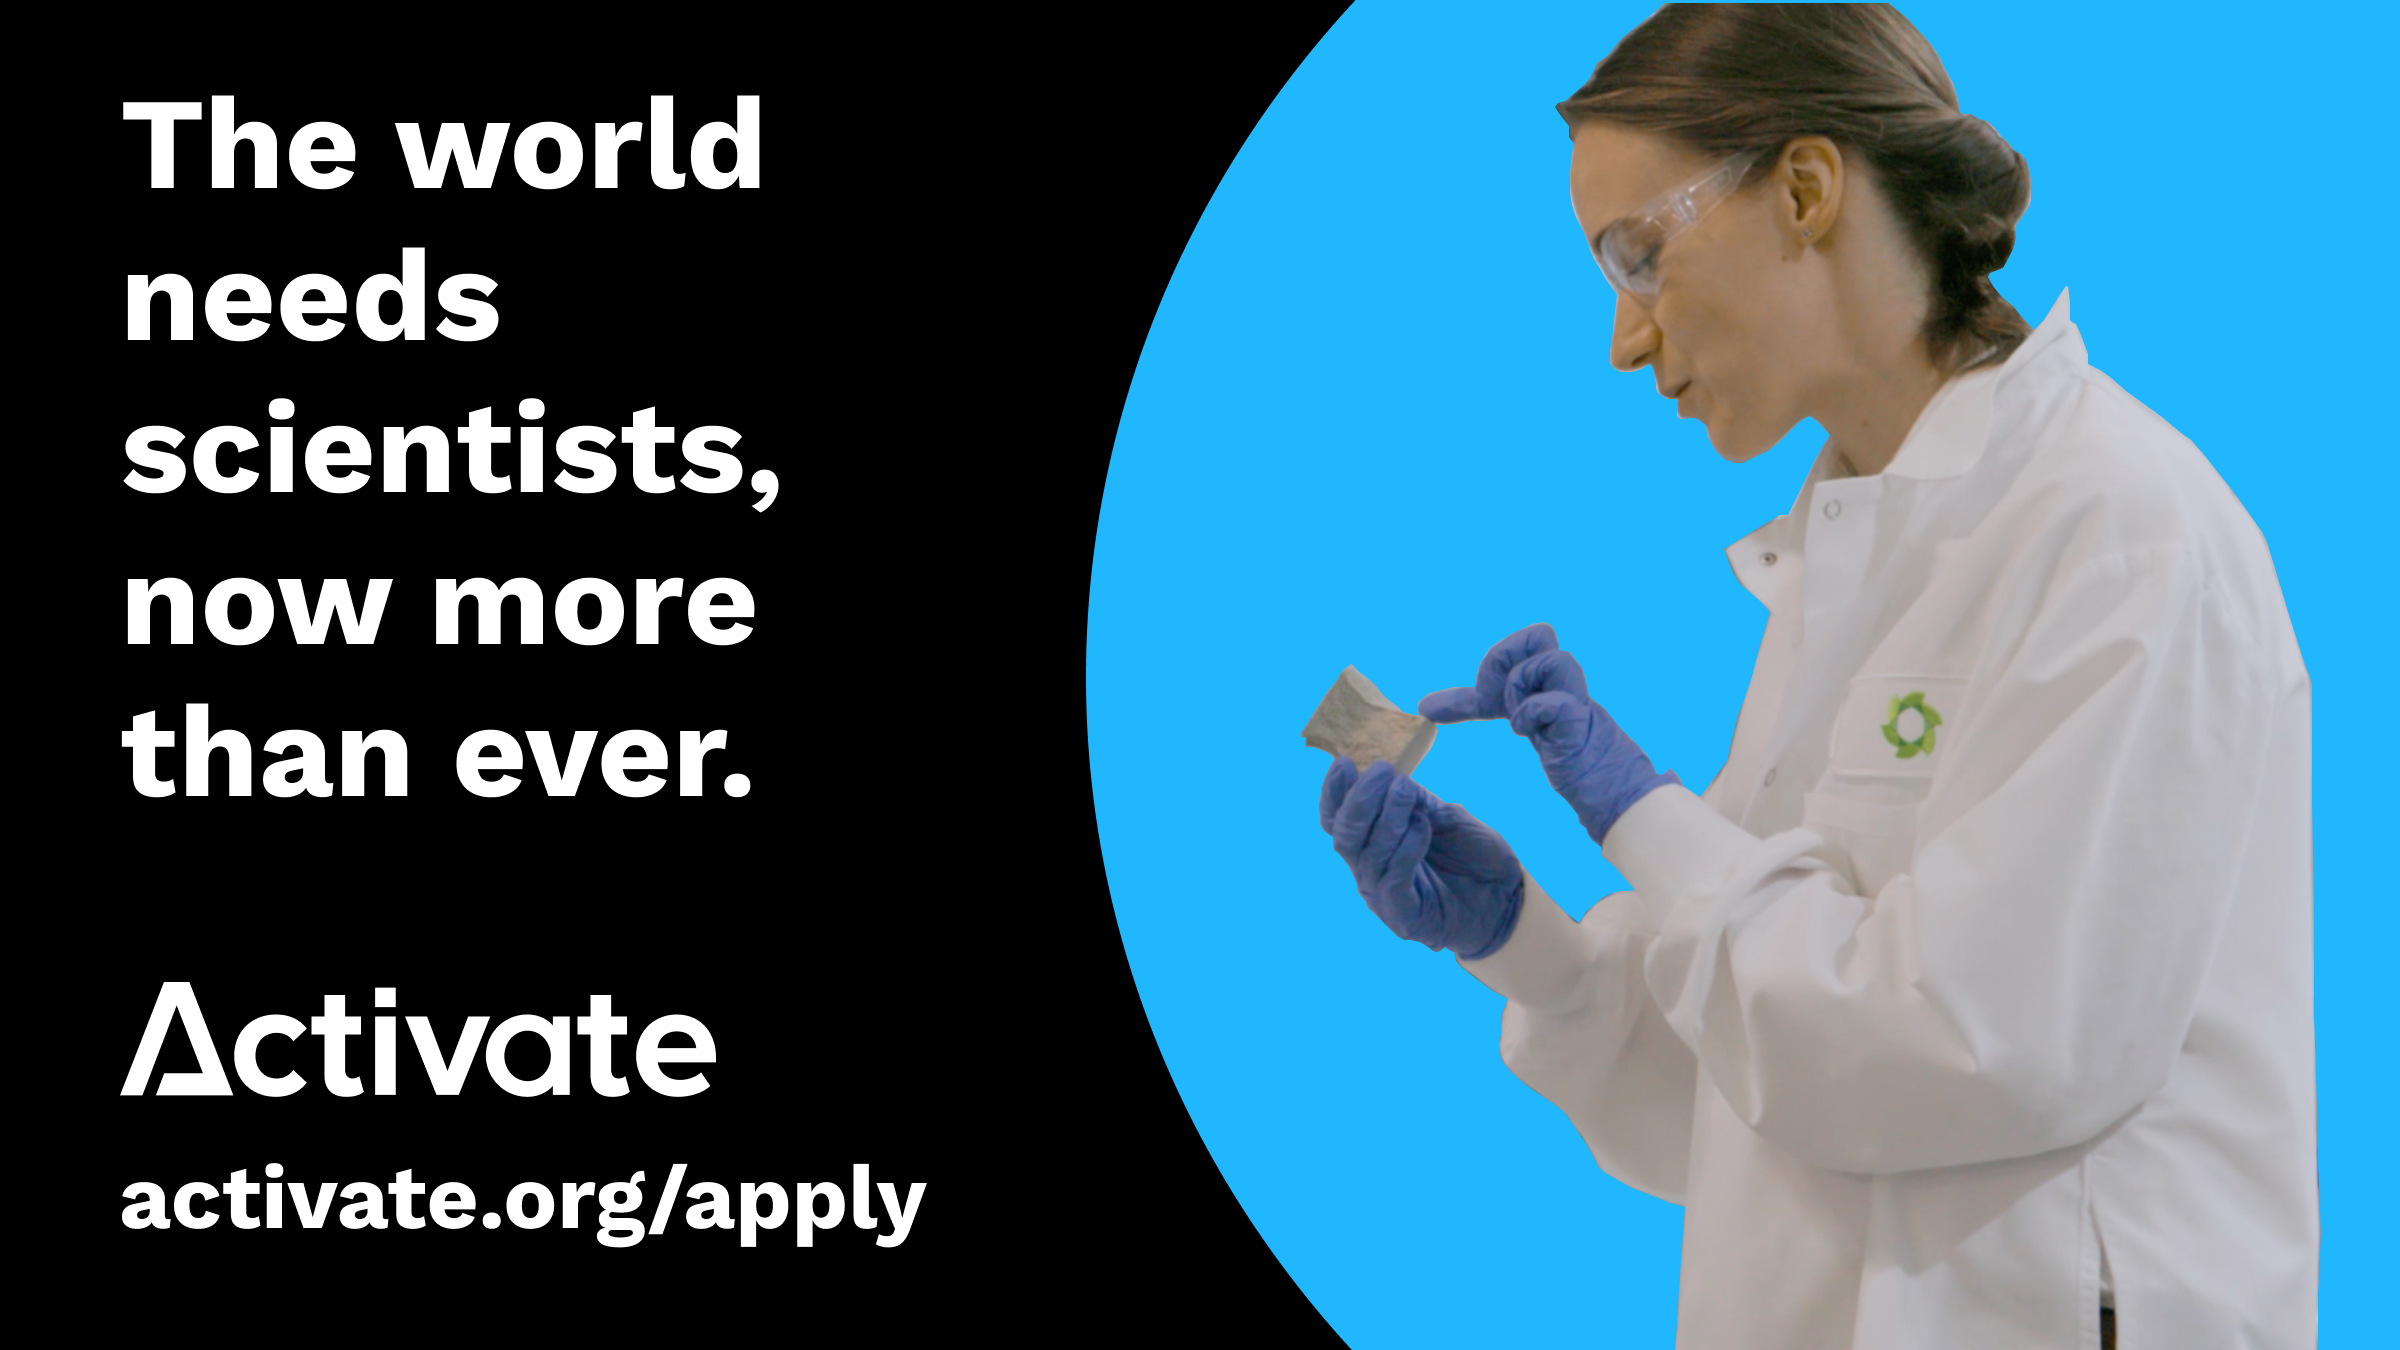 The world needs scientists, now more than ever. Apply to Activate!